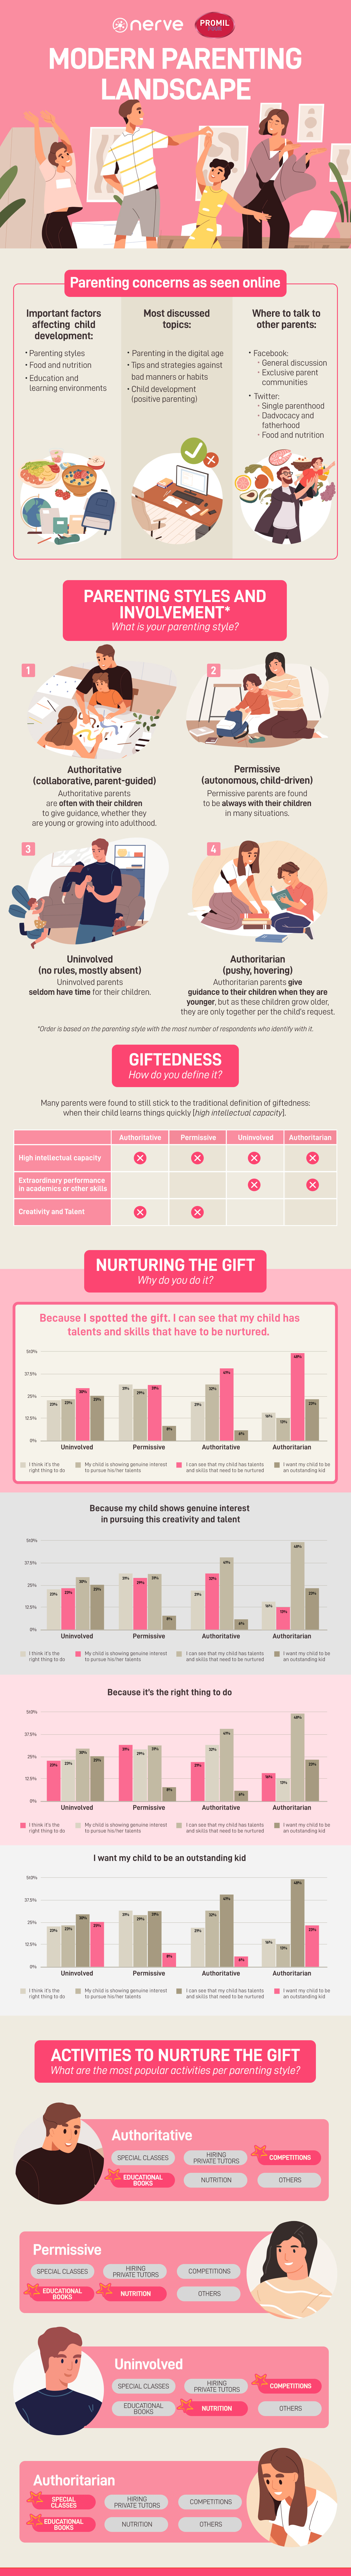 INFOGRAPHIC: The modern parenting landscape